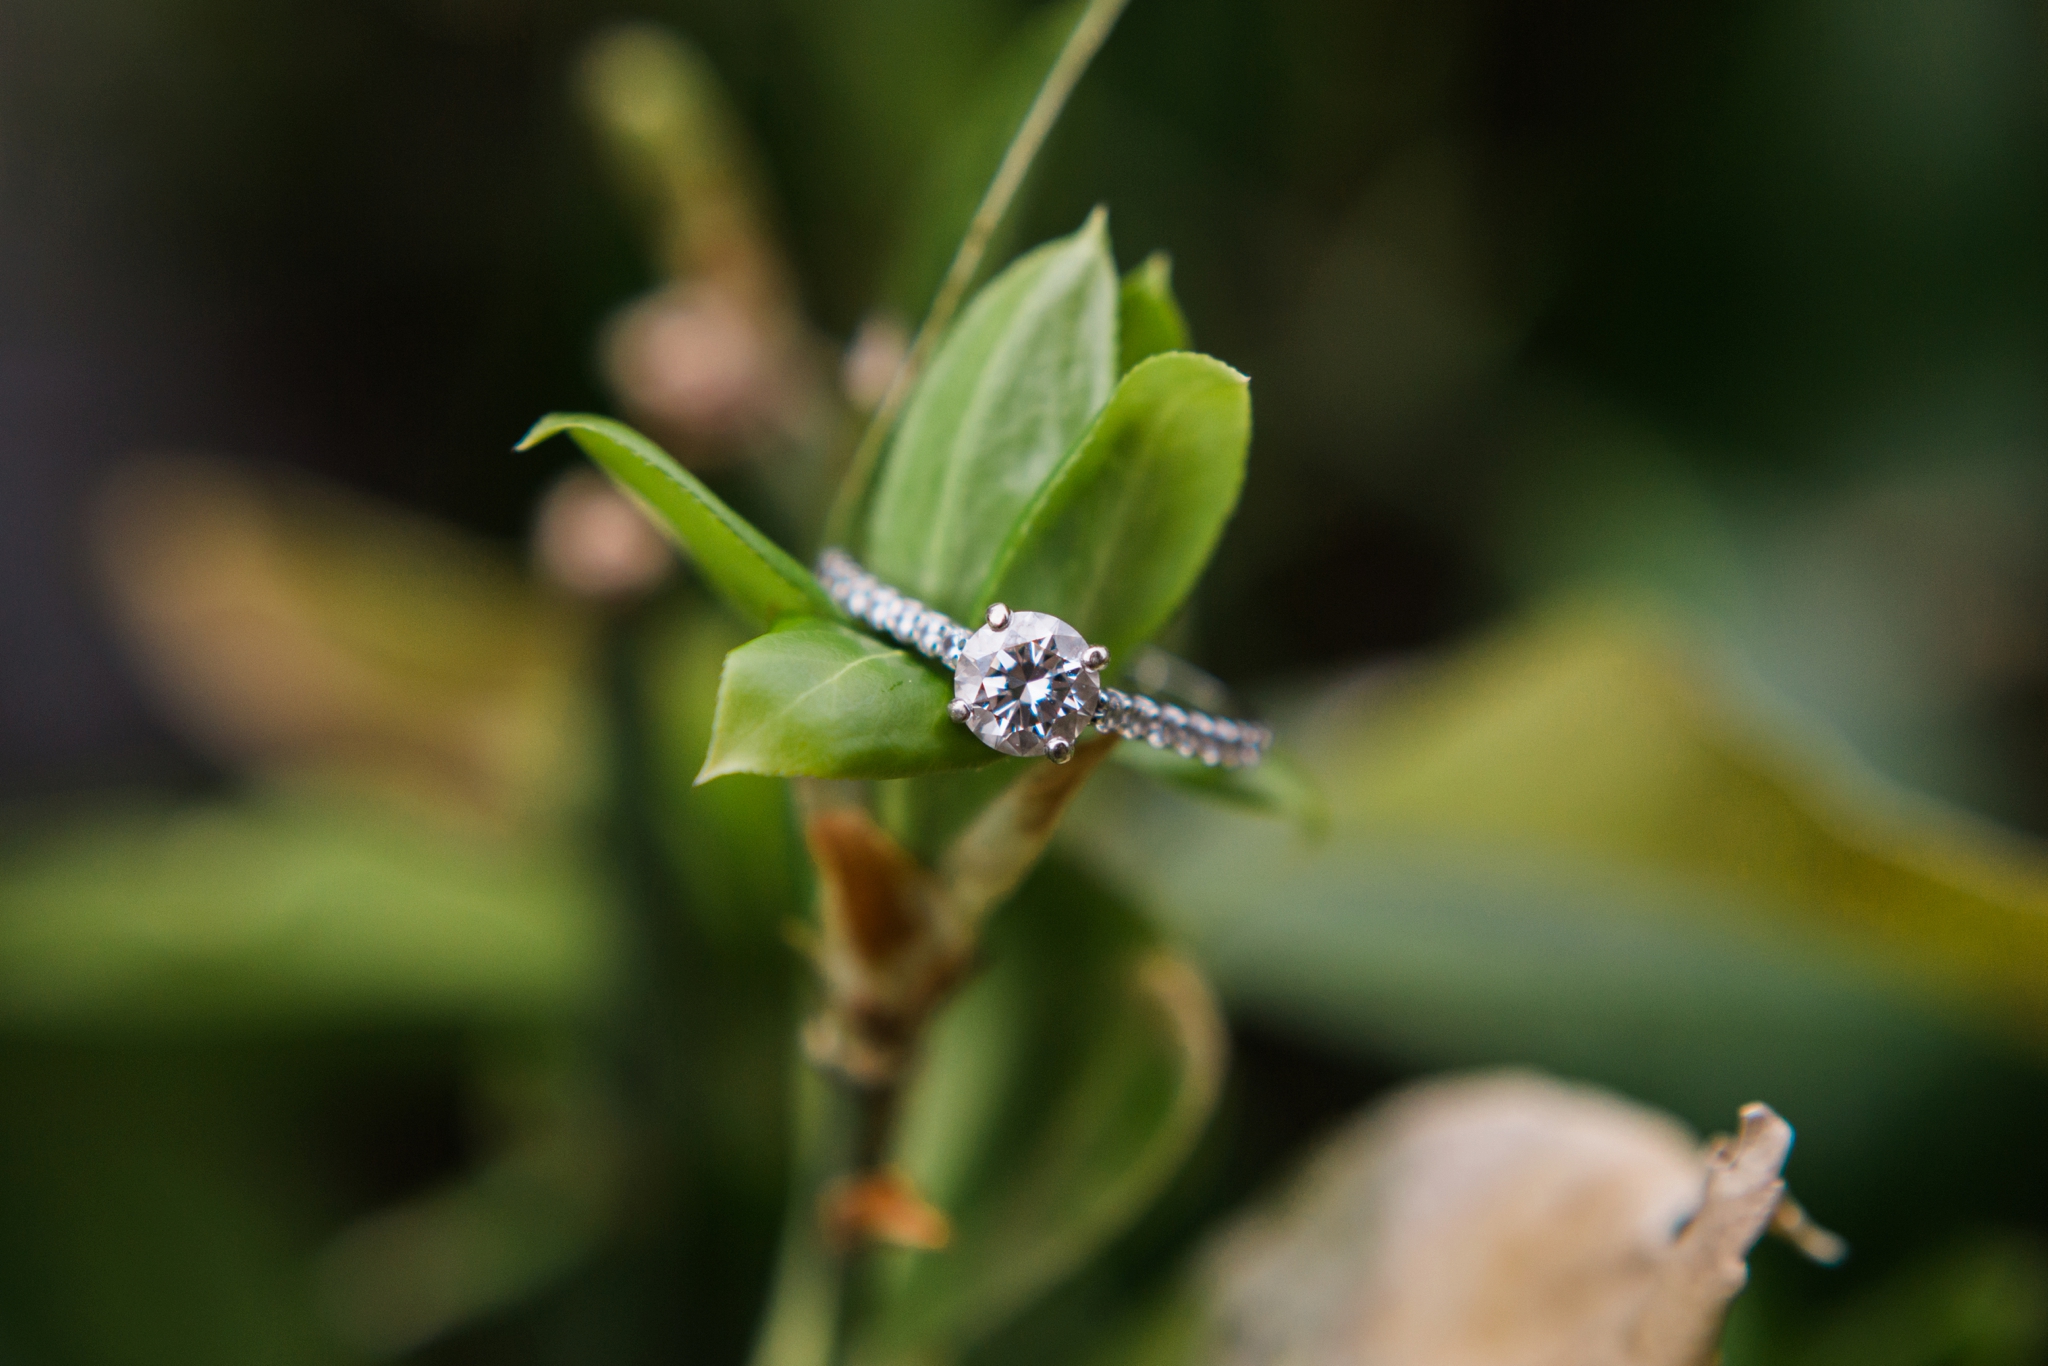 Emily Grace Photography, Lancaster PA Wedding Photographer, Photography for Joyful Couples, Greenfield Corporate Center Park Engagement Session, Nature Engagement Ring Shot